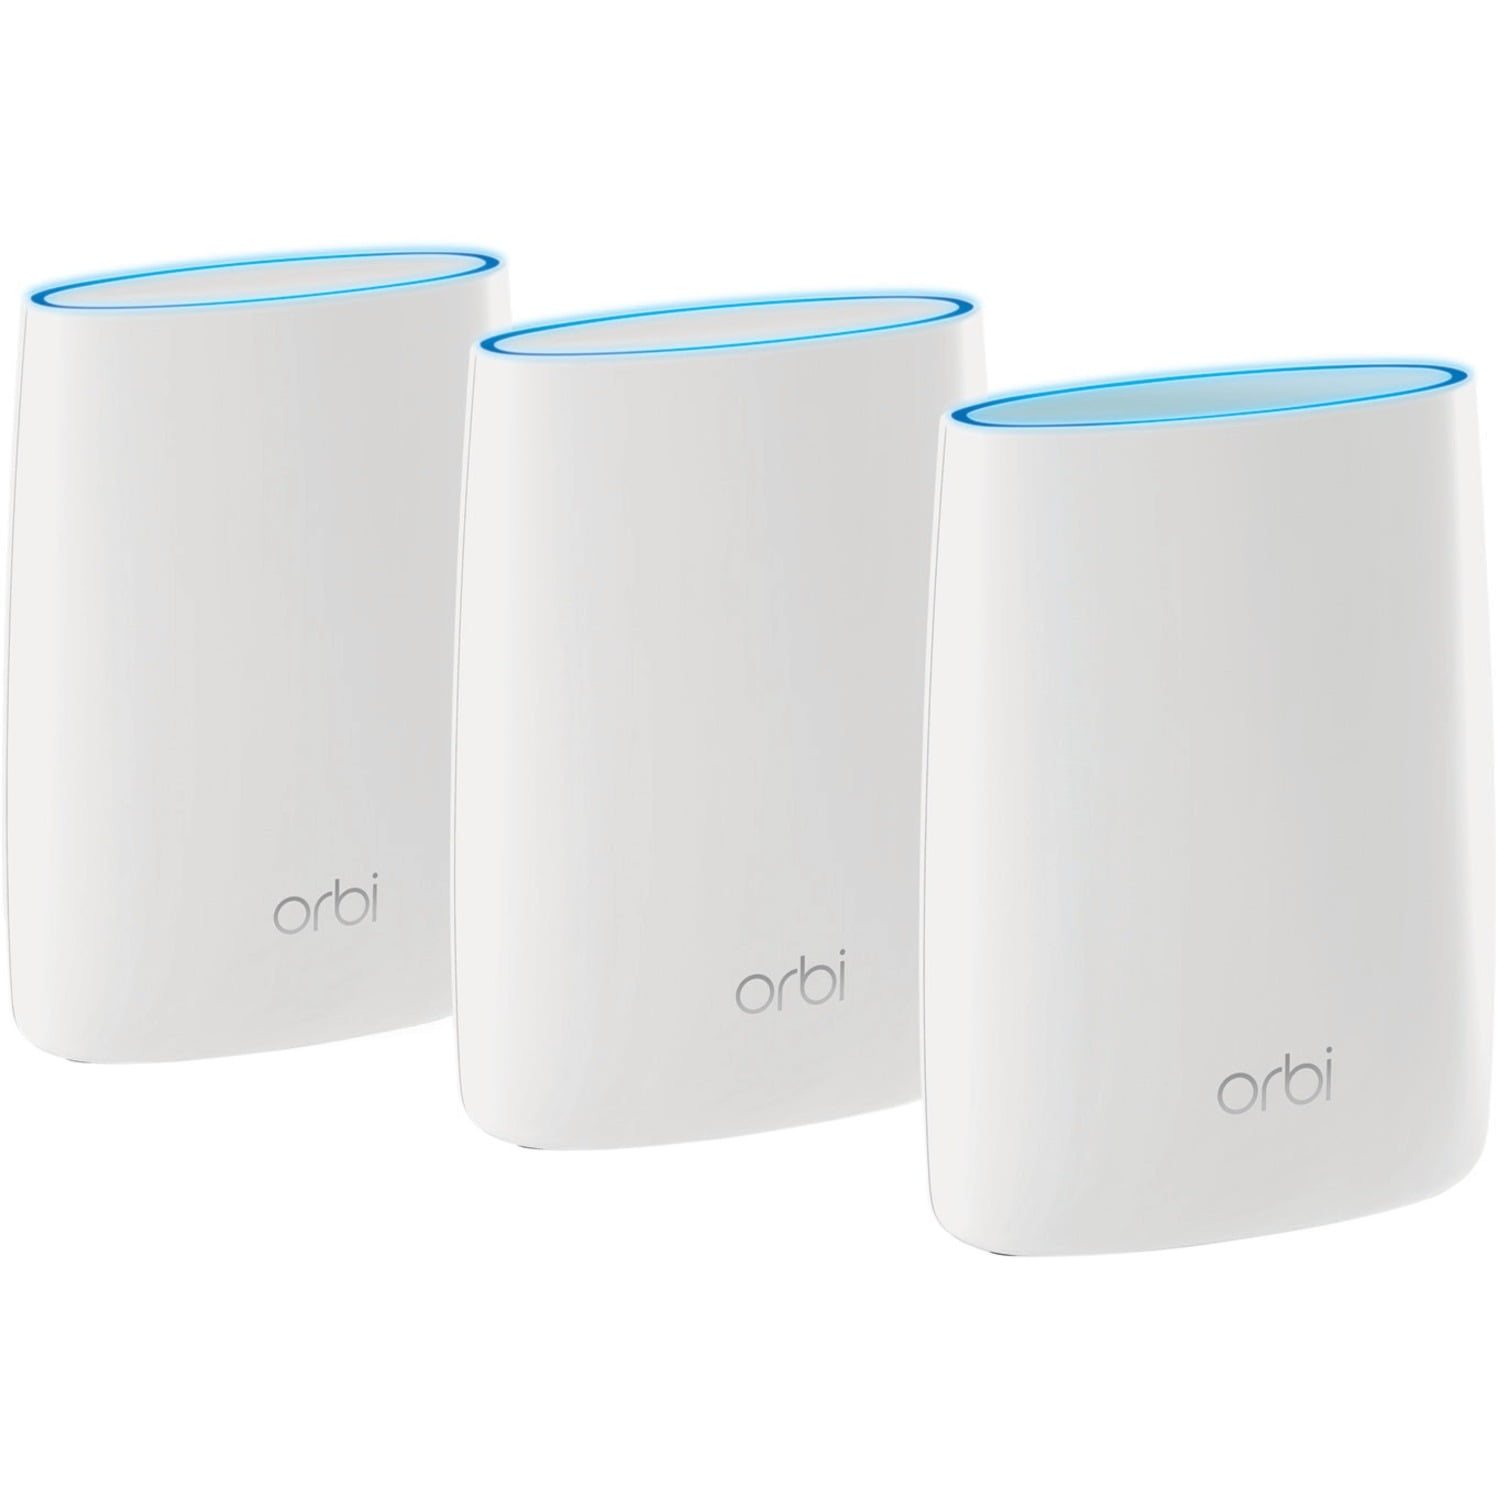 NETGEAR Orbi RBKE963 - Wi-Fi system (router, 2 extenders) - up to